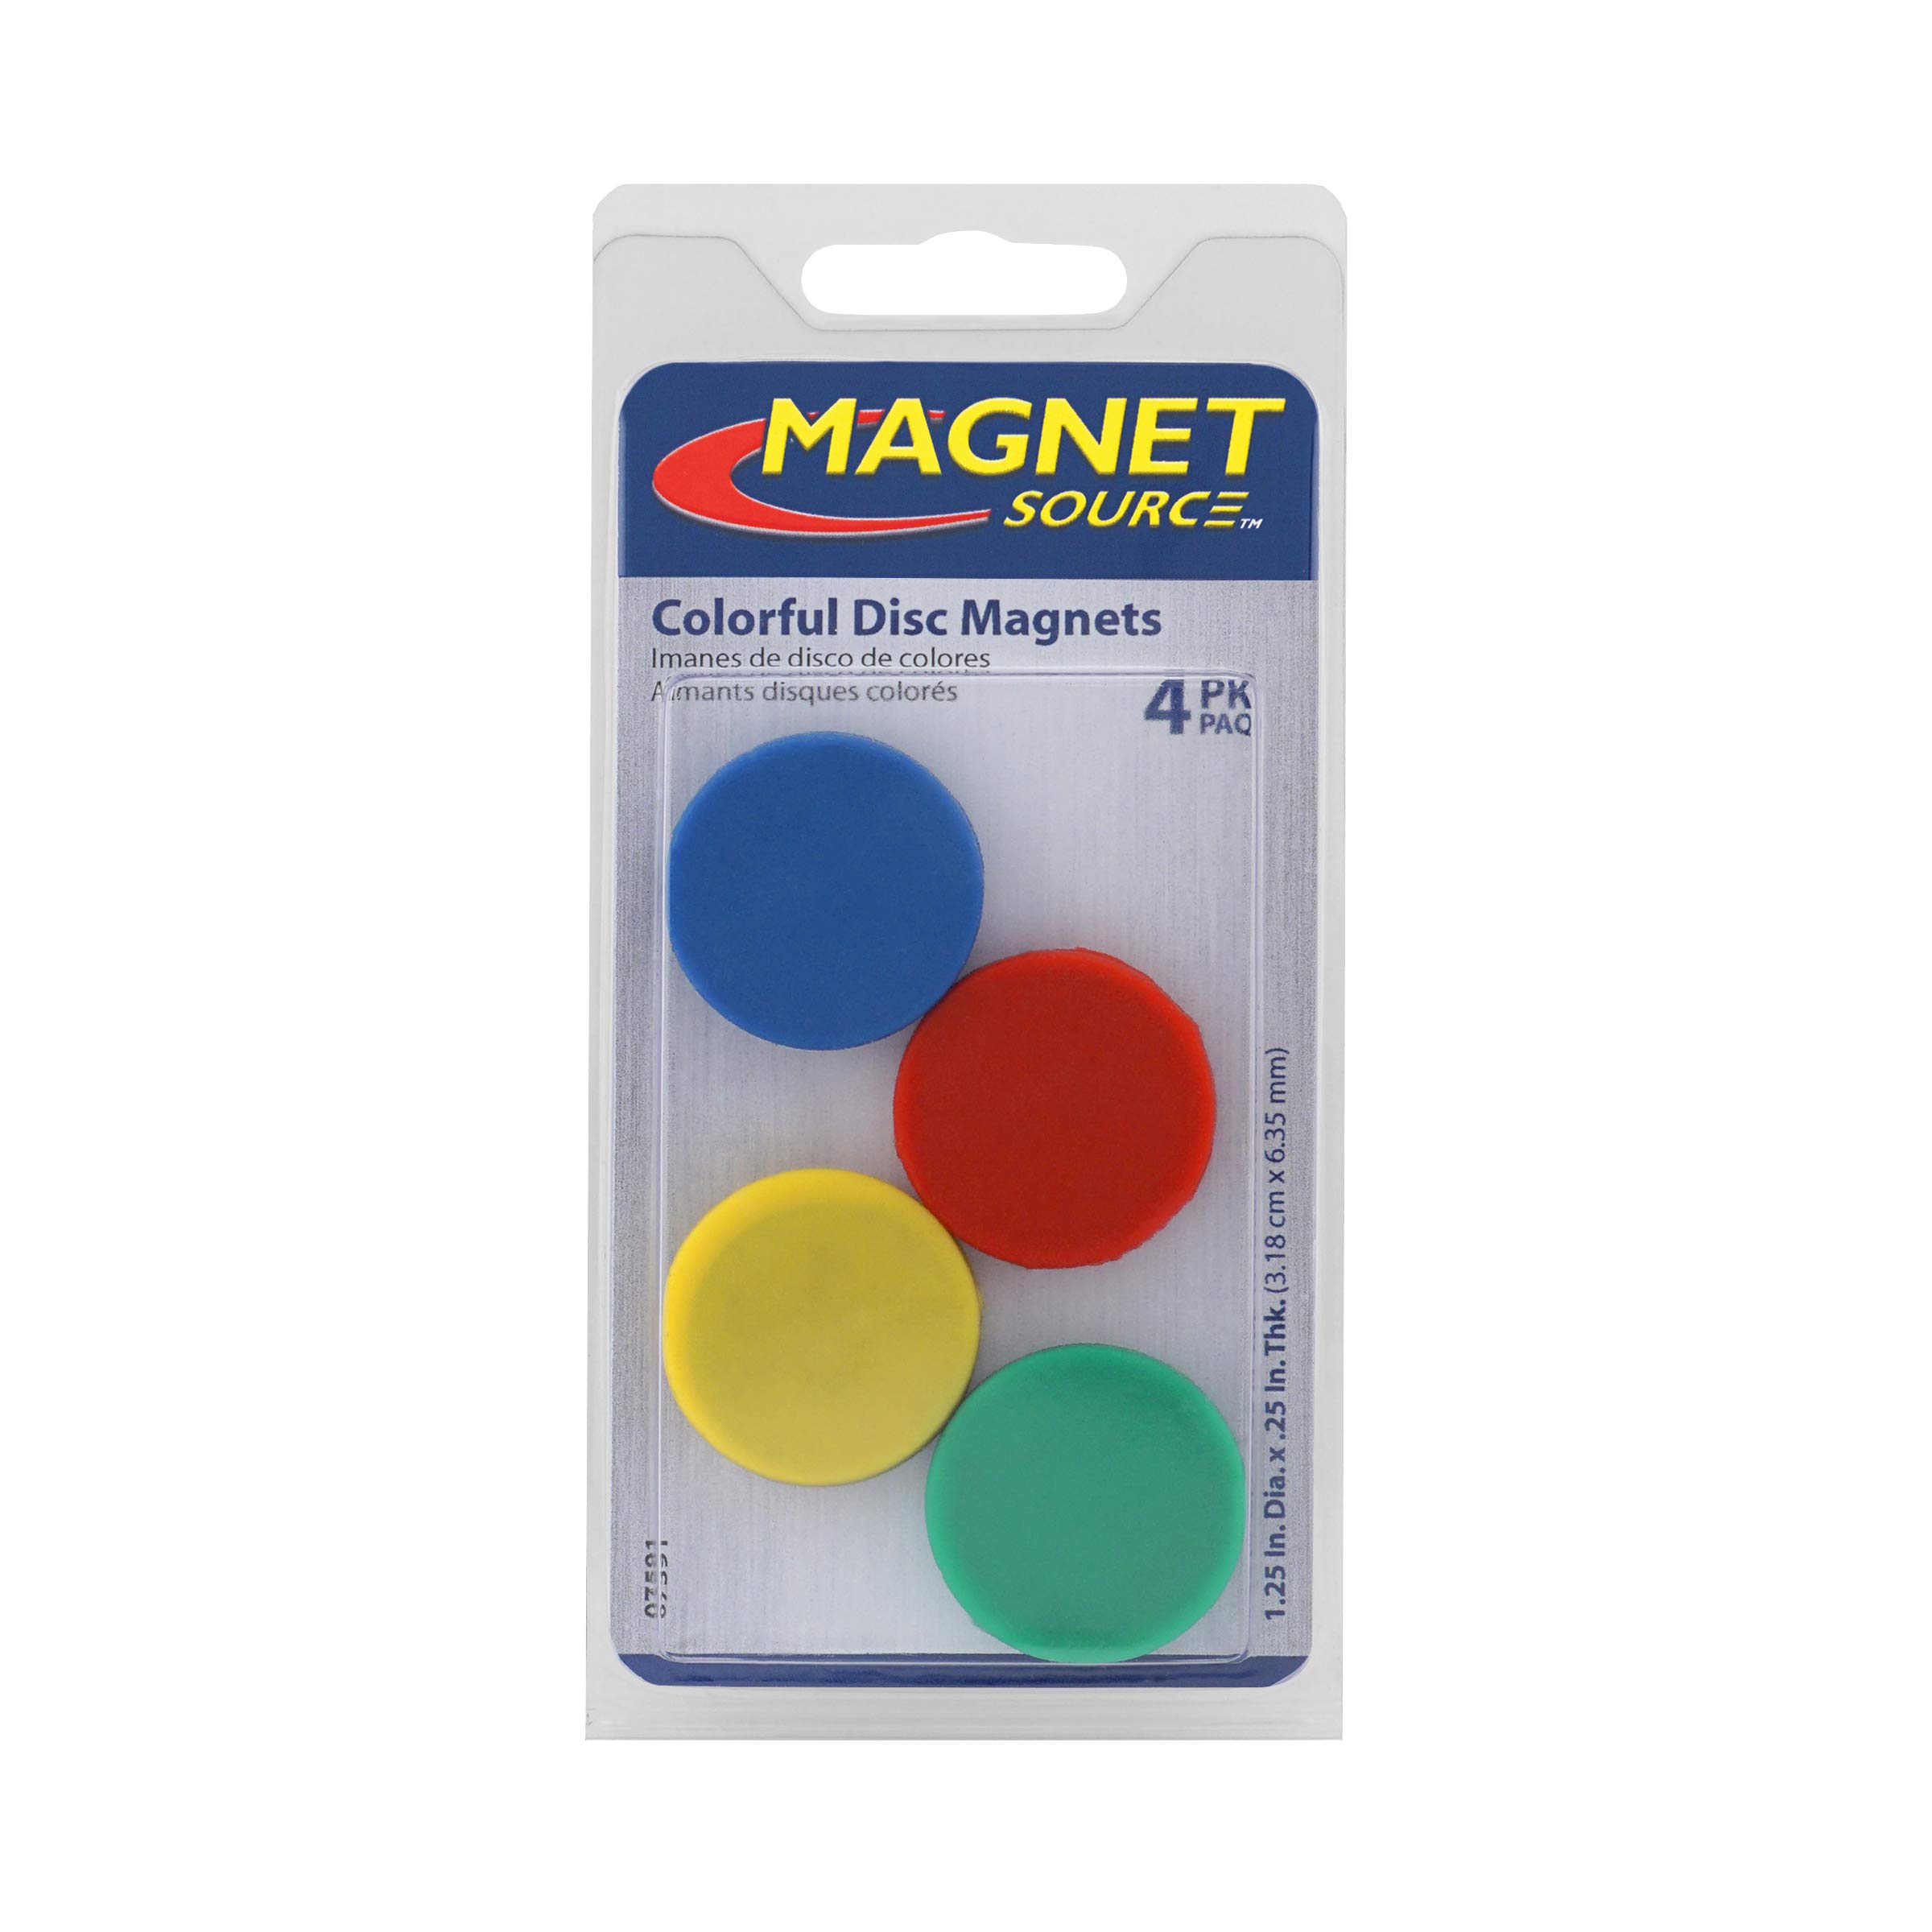 Colorful Ceramic Disc Magnets, Rubber Coated, Red, Blue, Green, Yellow (1 of each color)